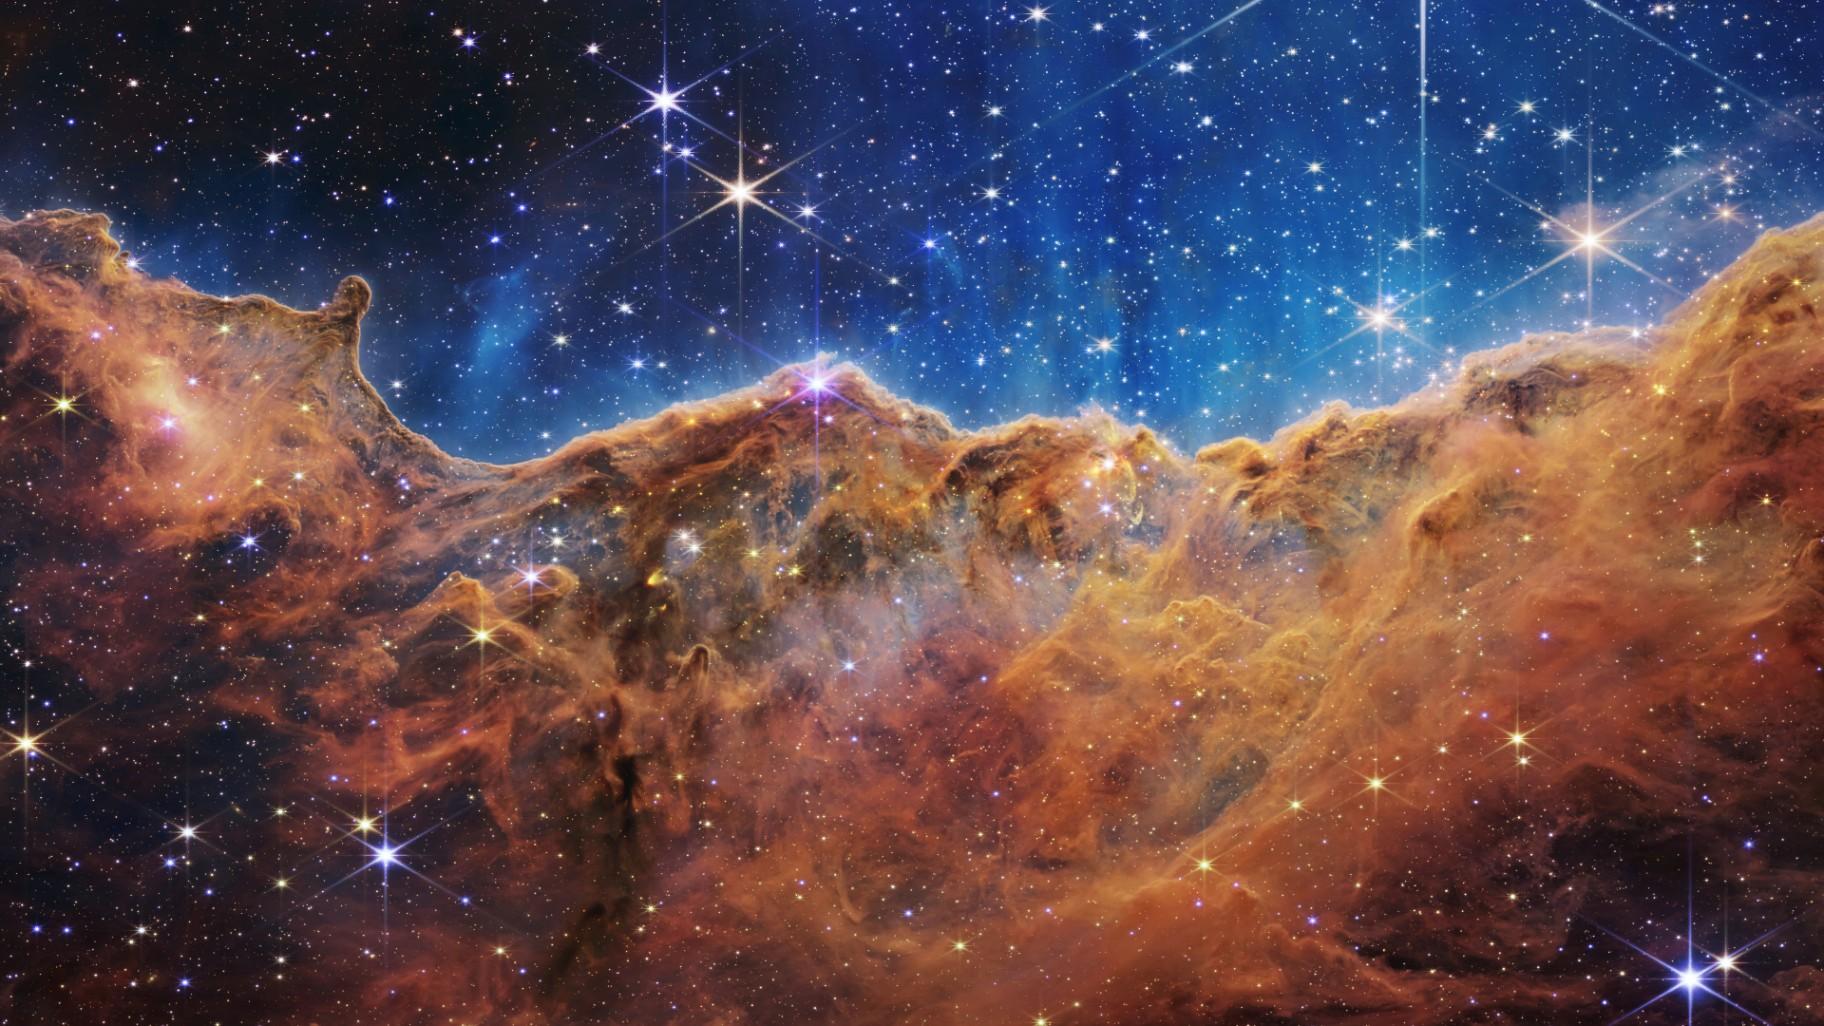 This image released by NASA on Tuesday, July 12, 2022, shows the edge of a nearby, young, star-forming region NGC 3324 in the Carina Nebula. (NASA, ESA, CSA, and STScI via AP)